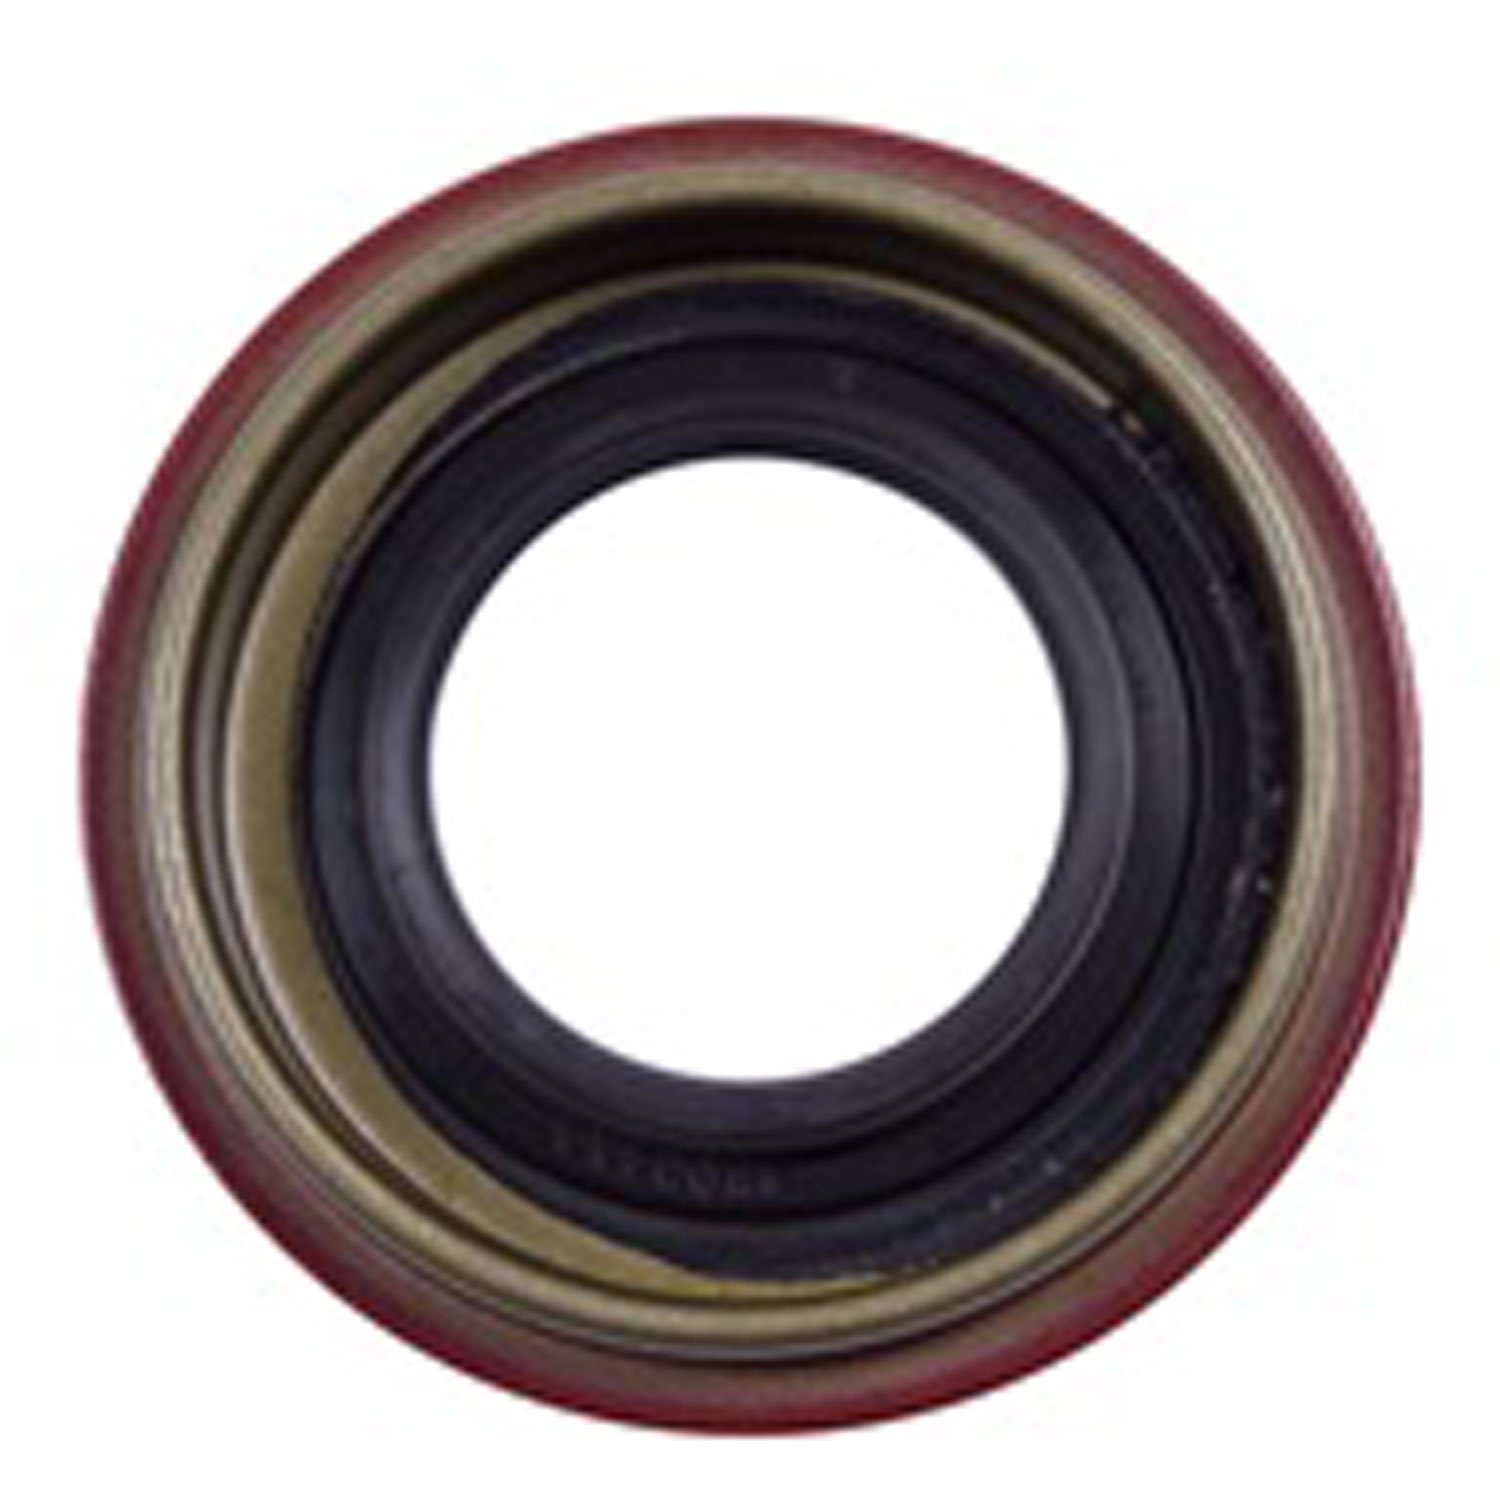 Pinion Oil Seal for 1945-1993 Willys/Jeep Models